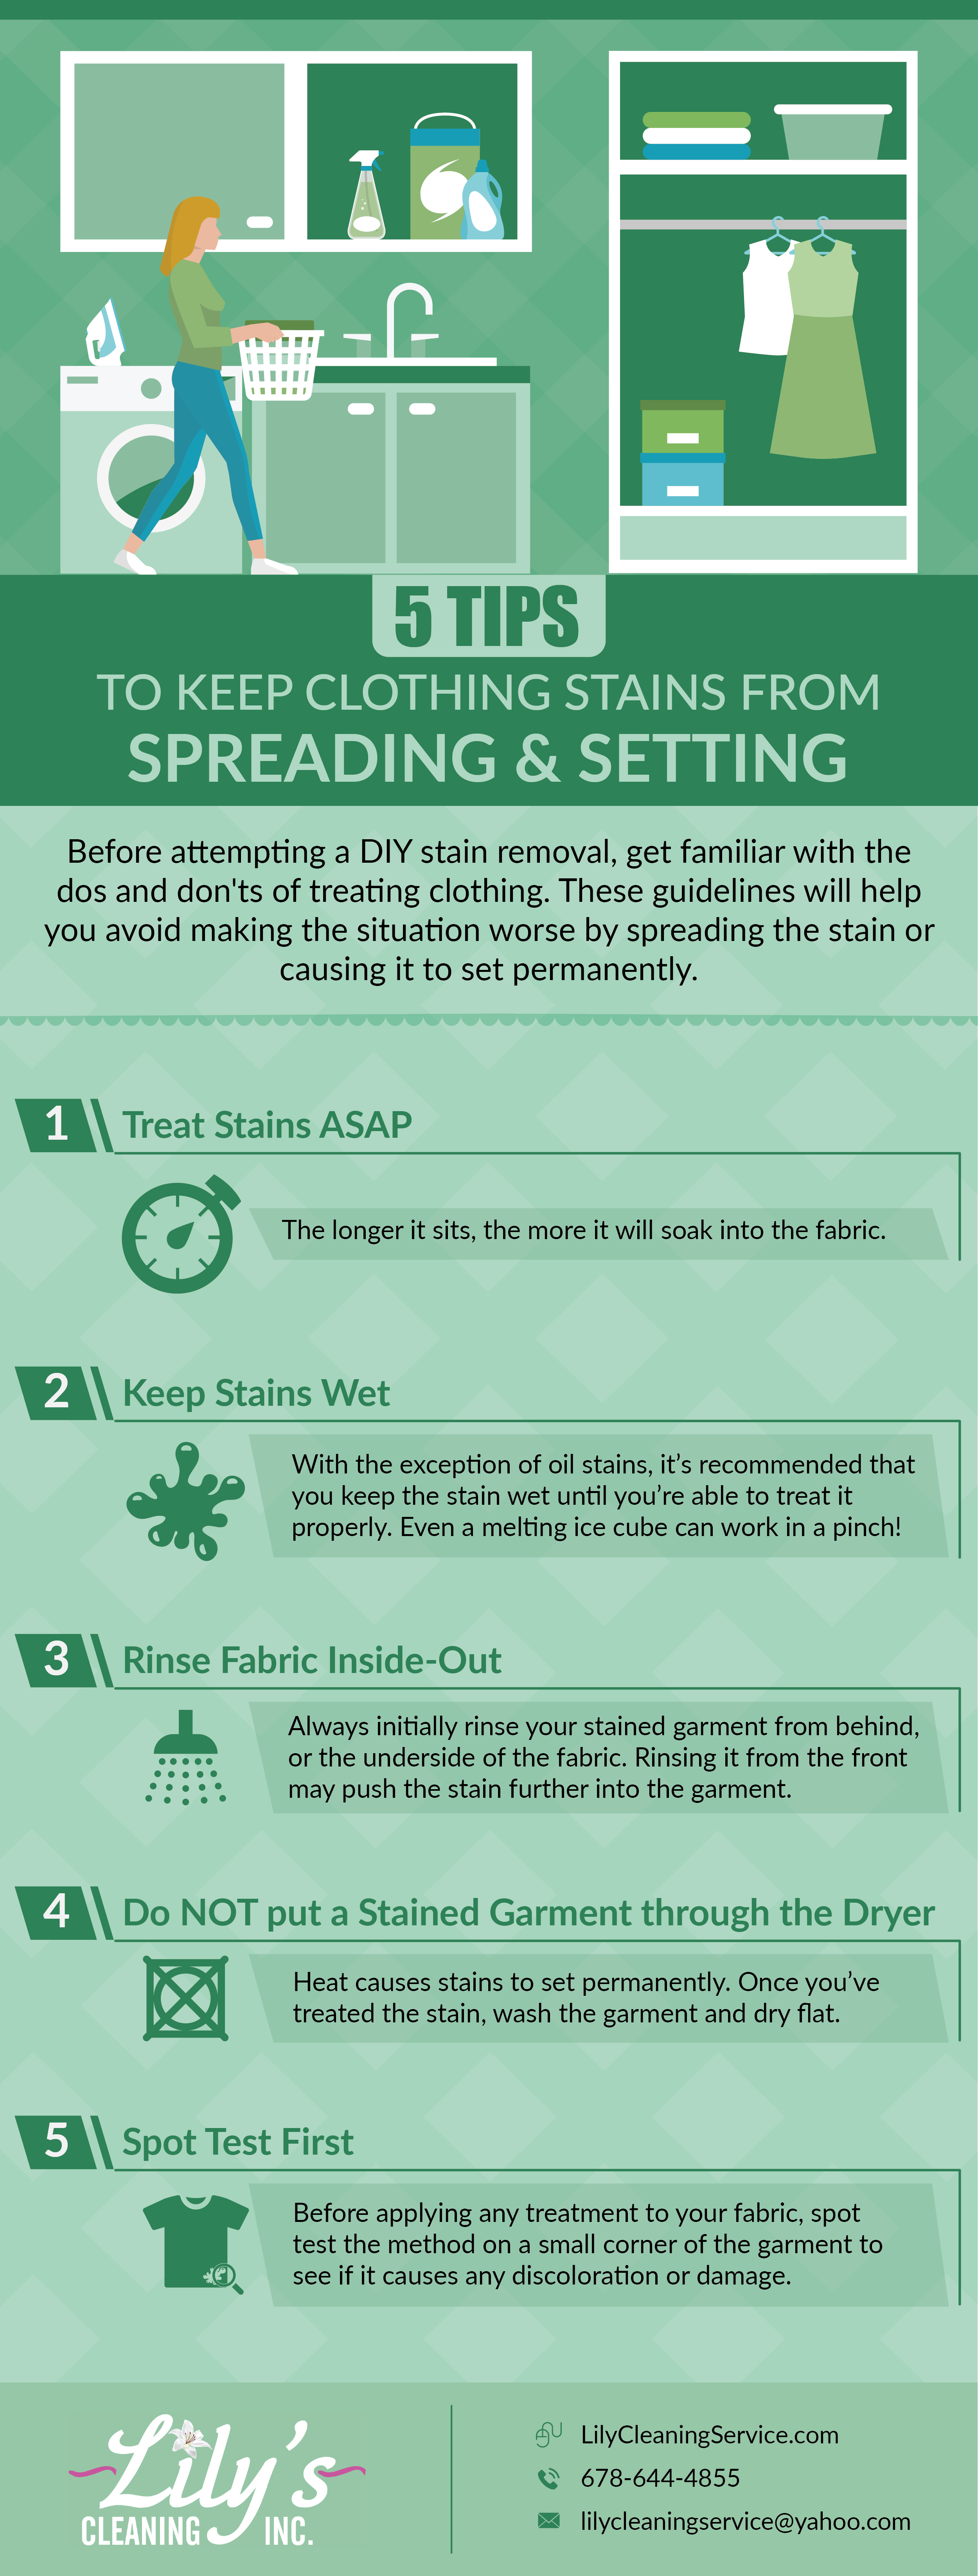 infographic-5-tips-clothining-stains-spreading-setting